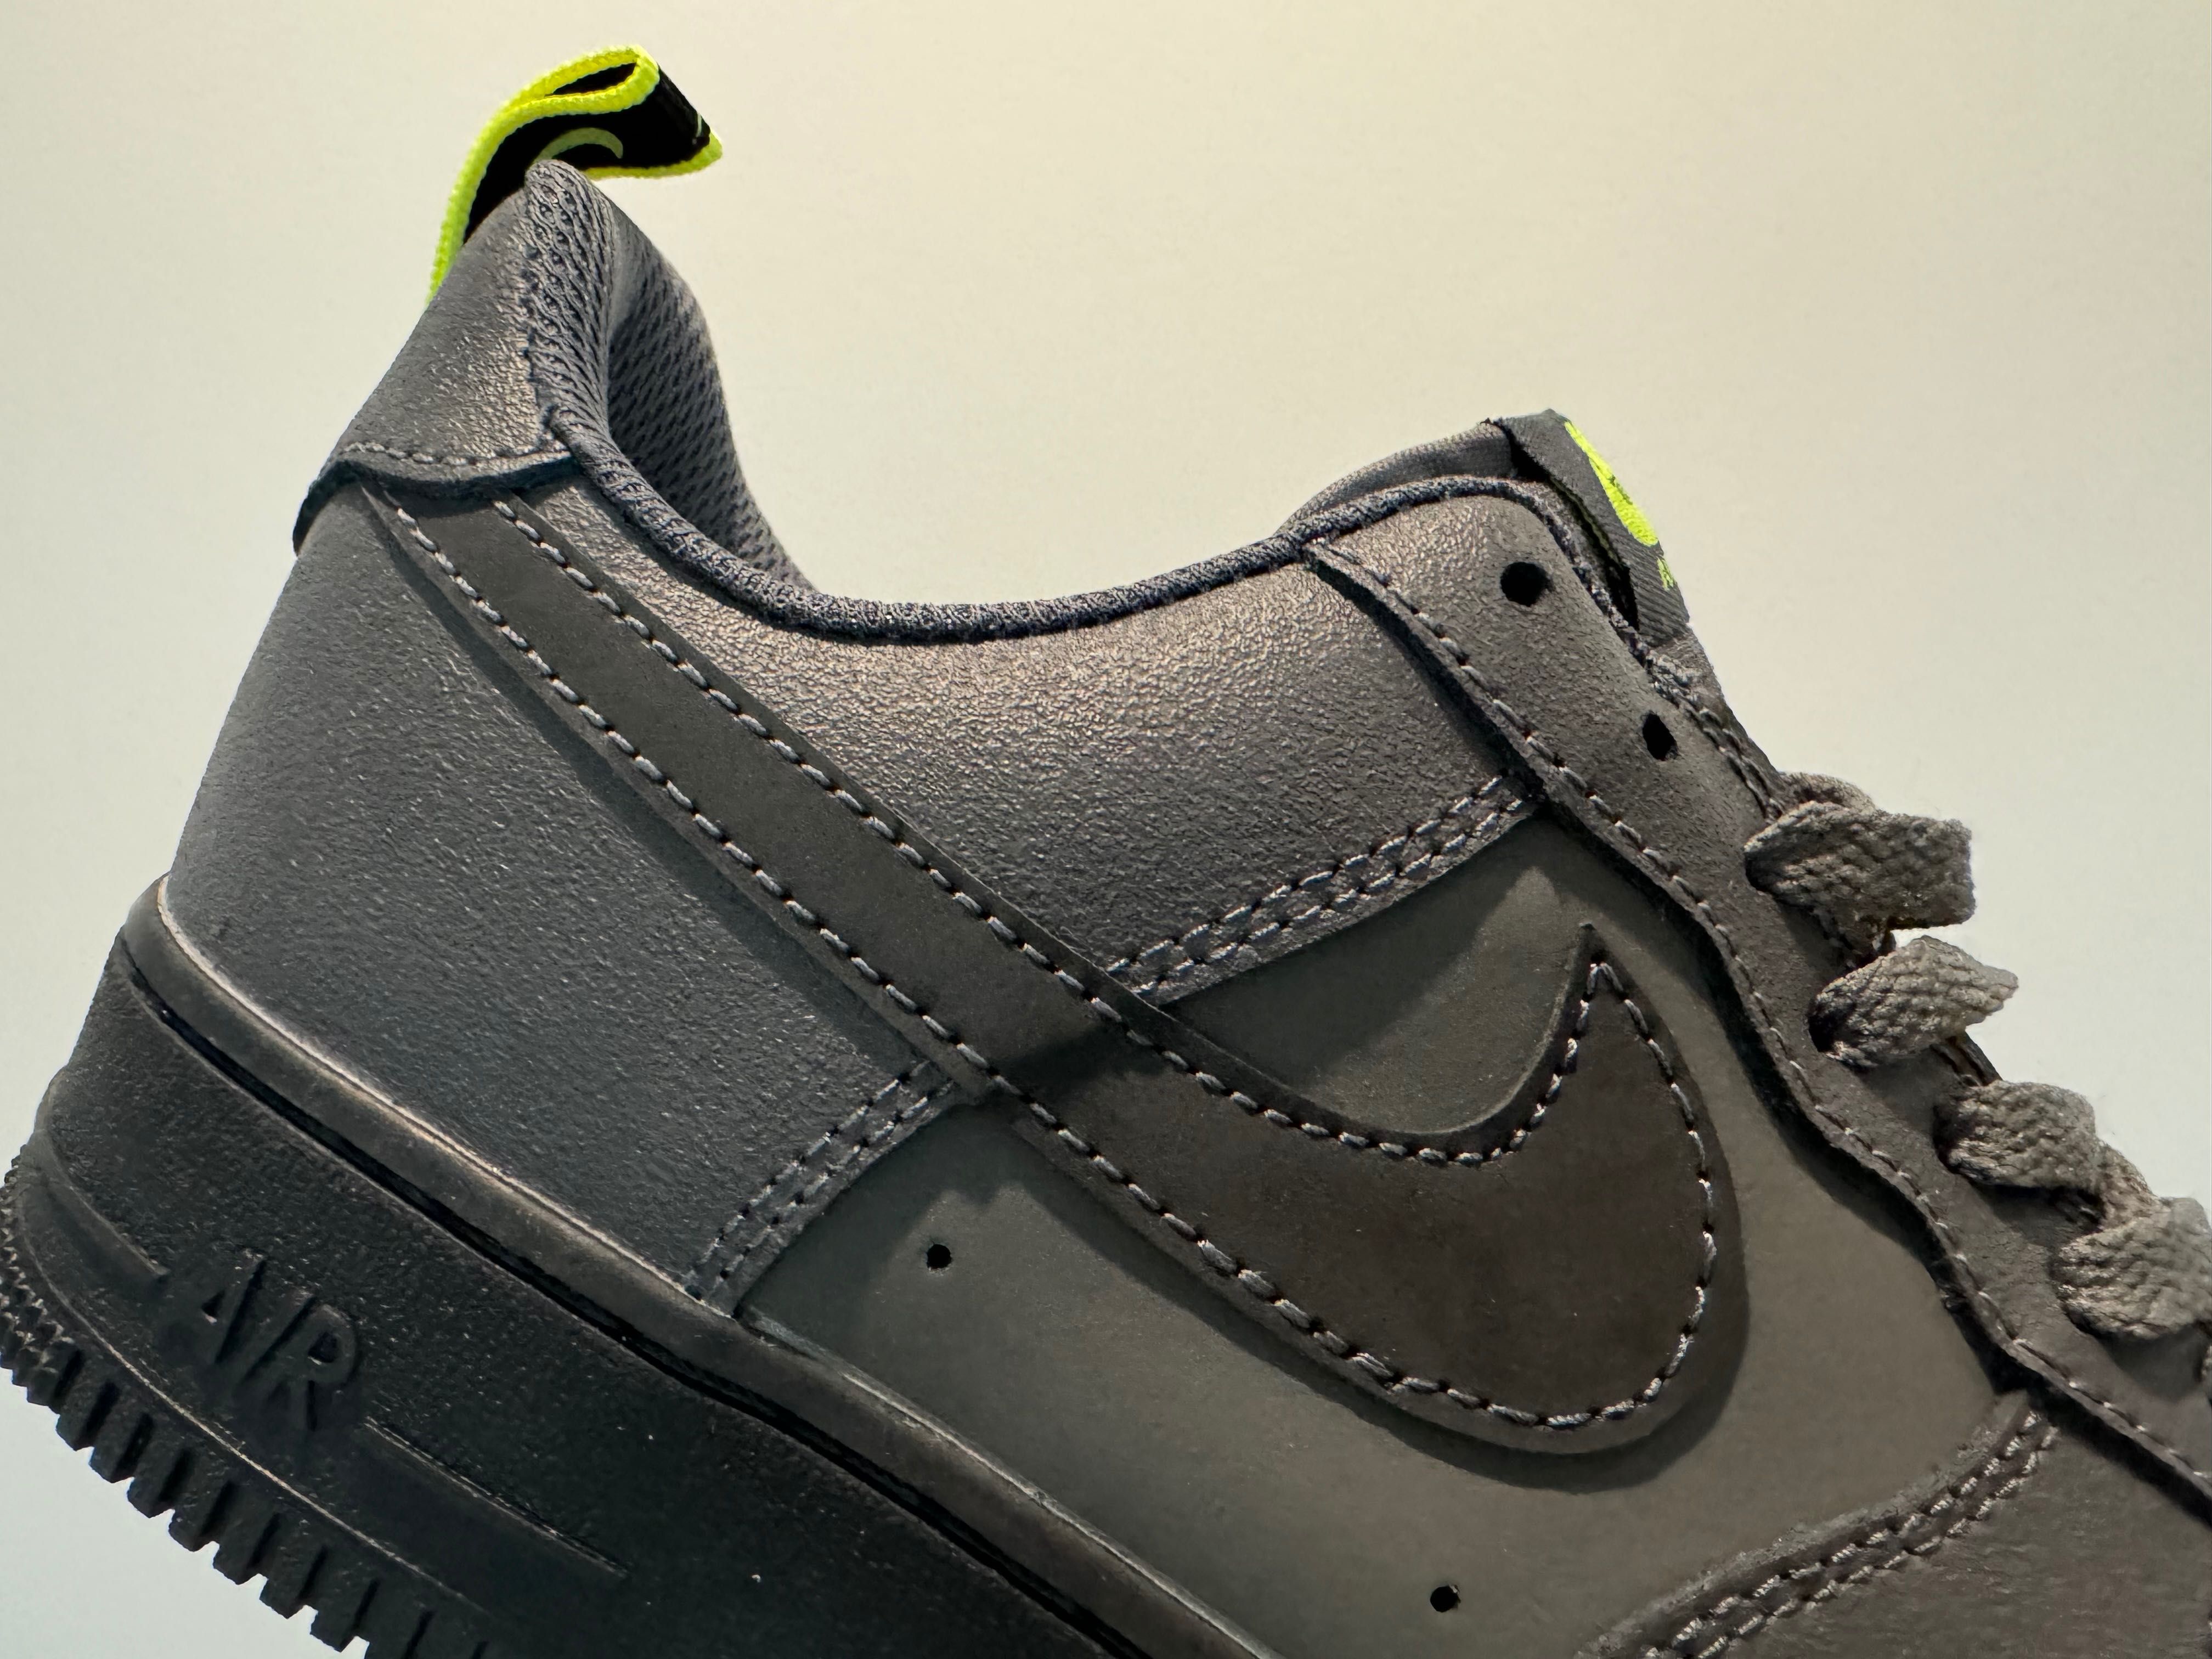 Buty Nike Air Force 1 Low '07 Iron Grey Volt Black r. 40,5